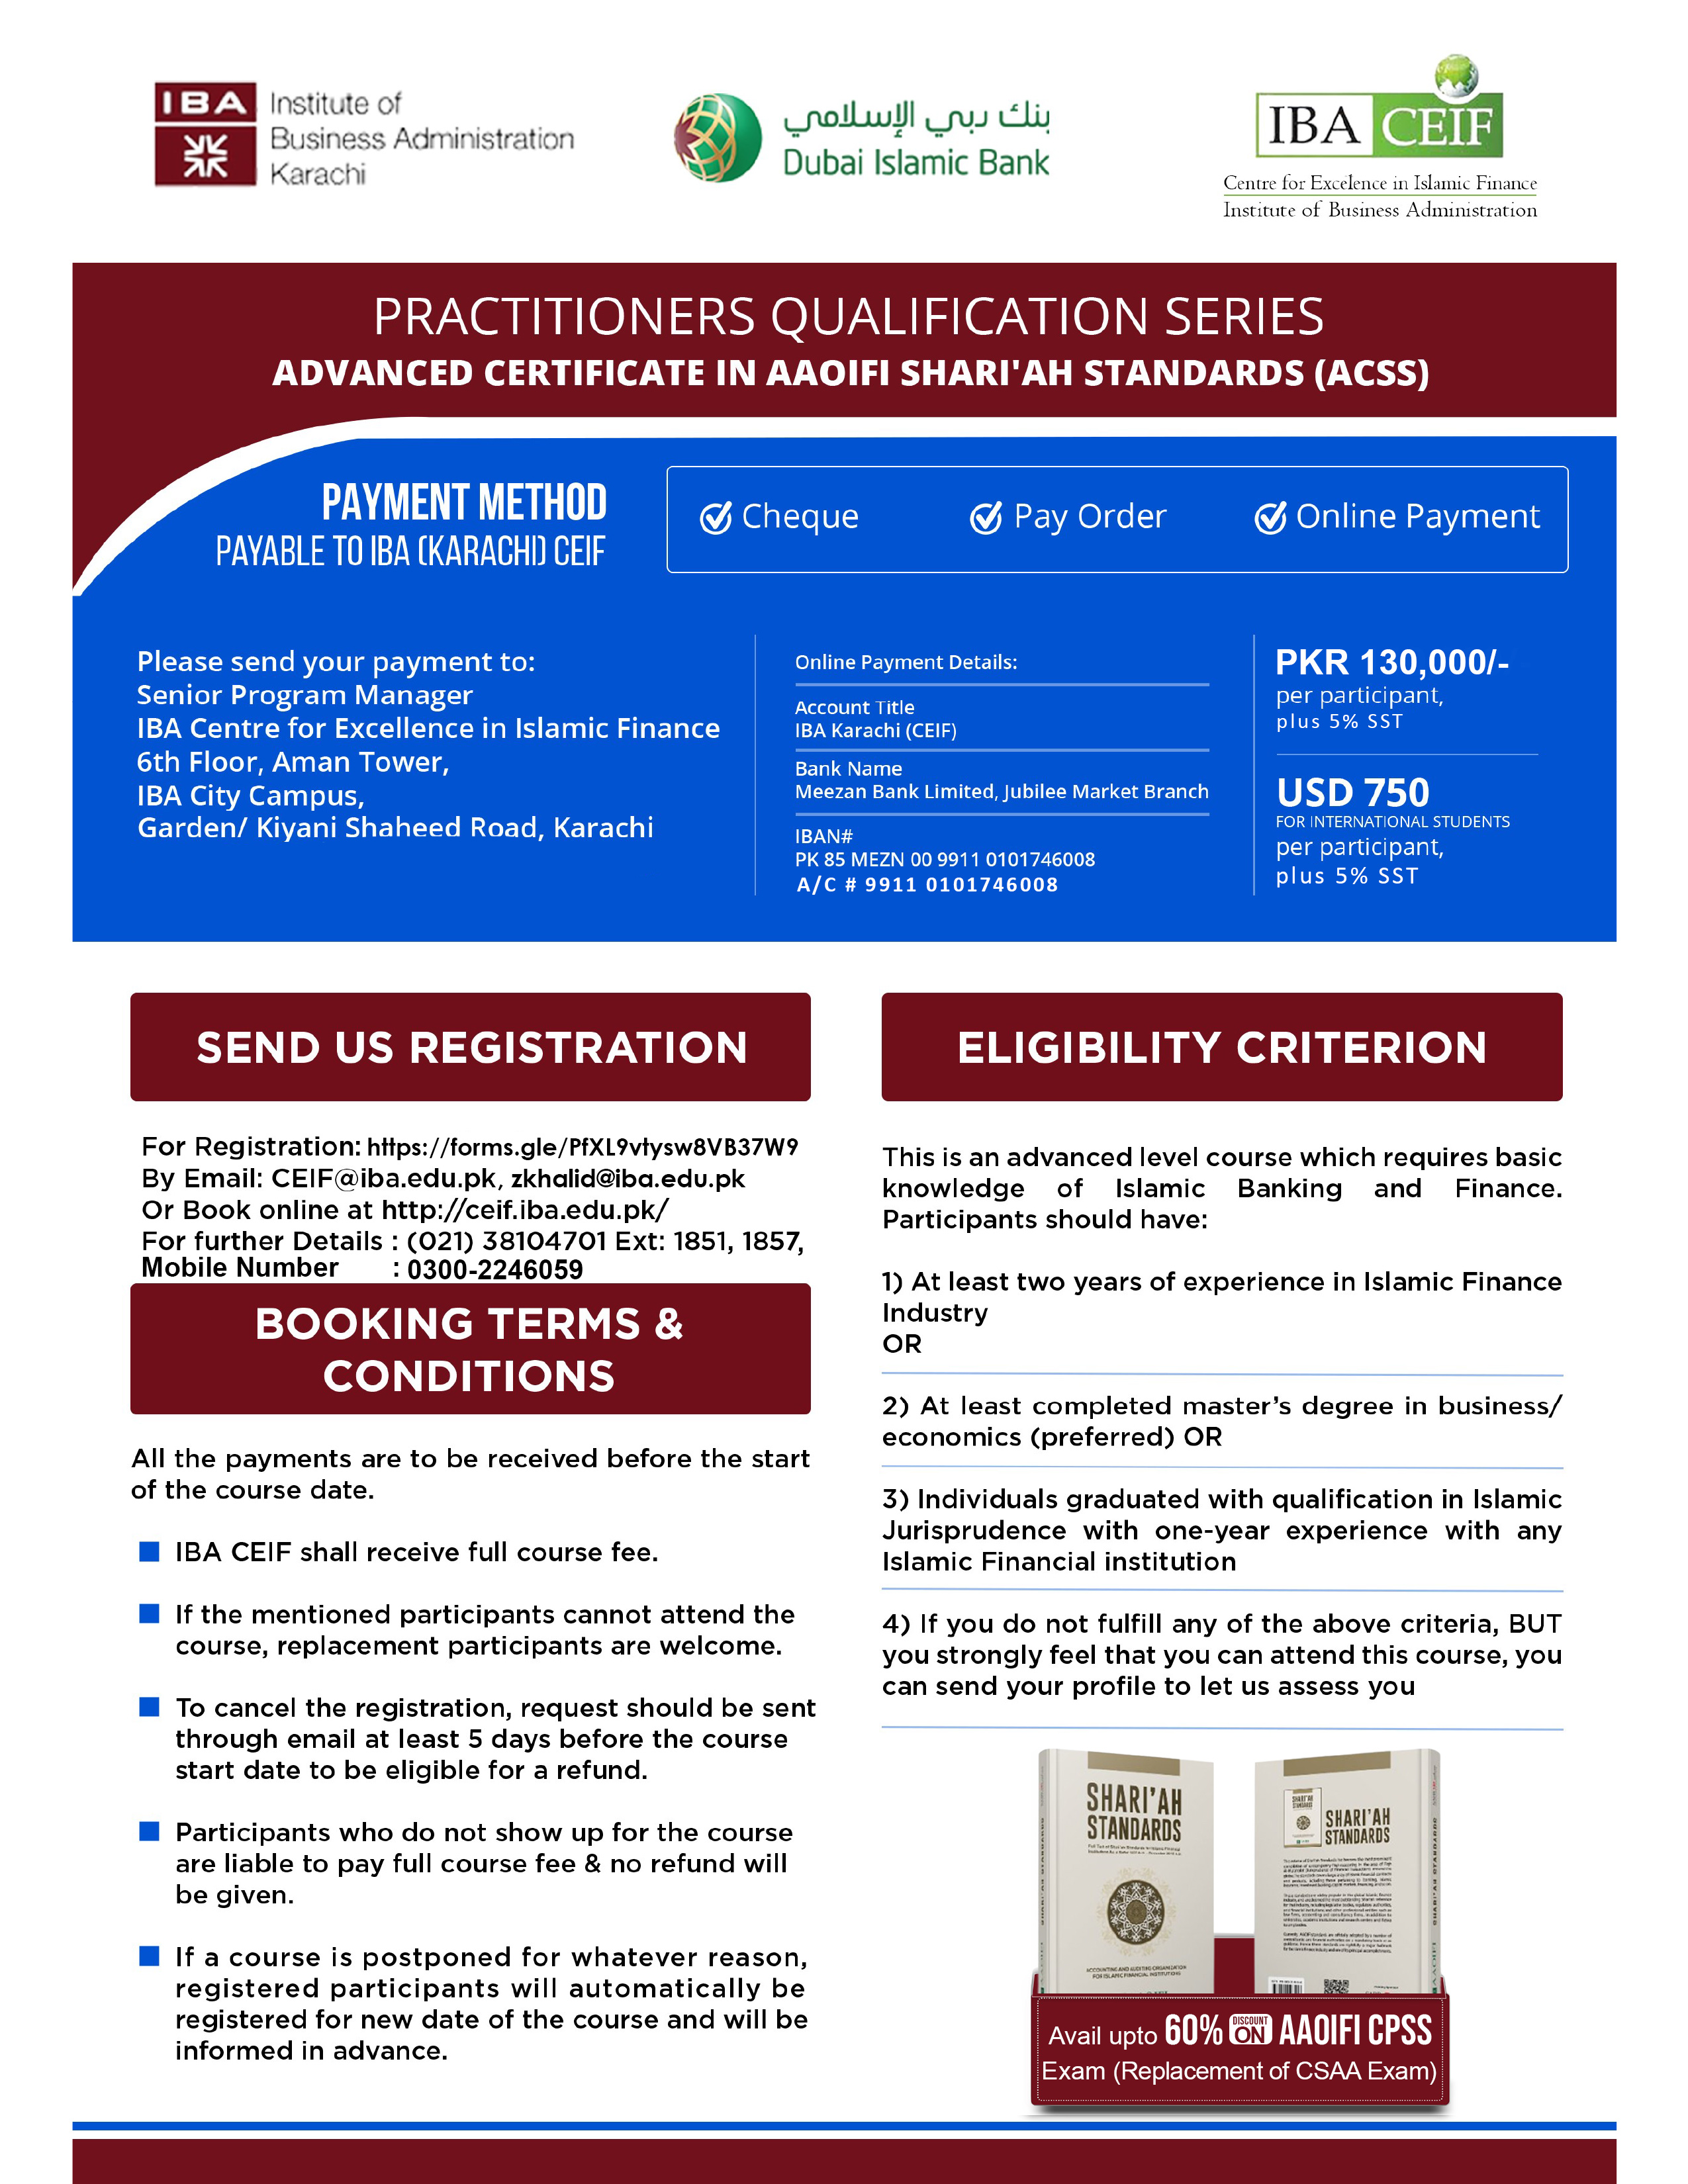 Advanced Certificate in AAOIFI Shariah Standards ACSS